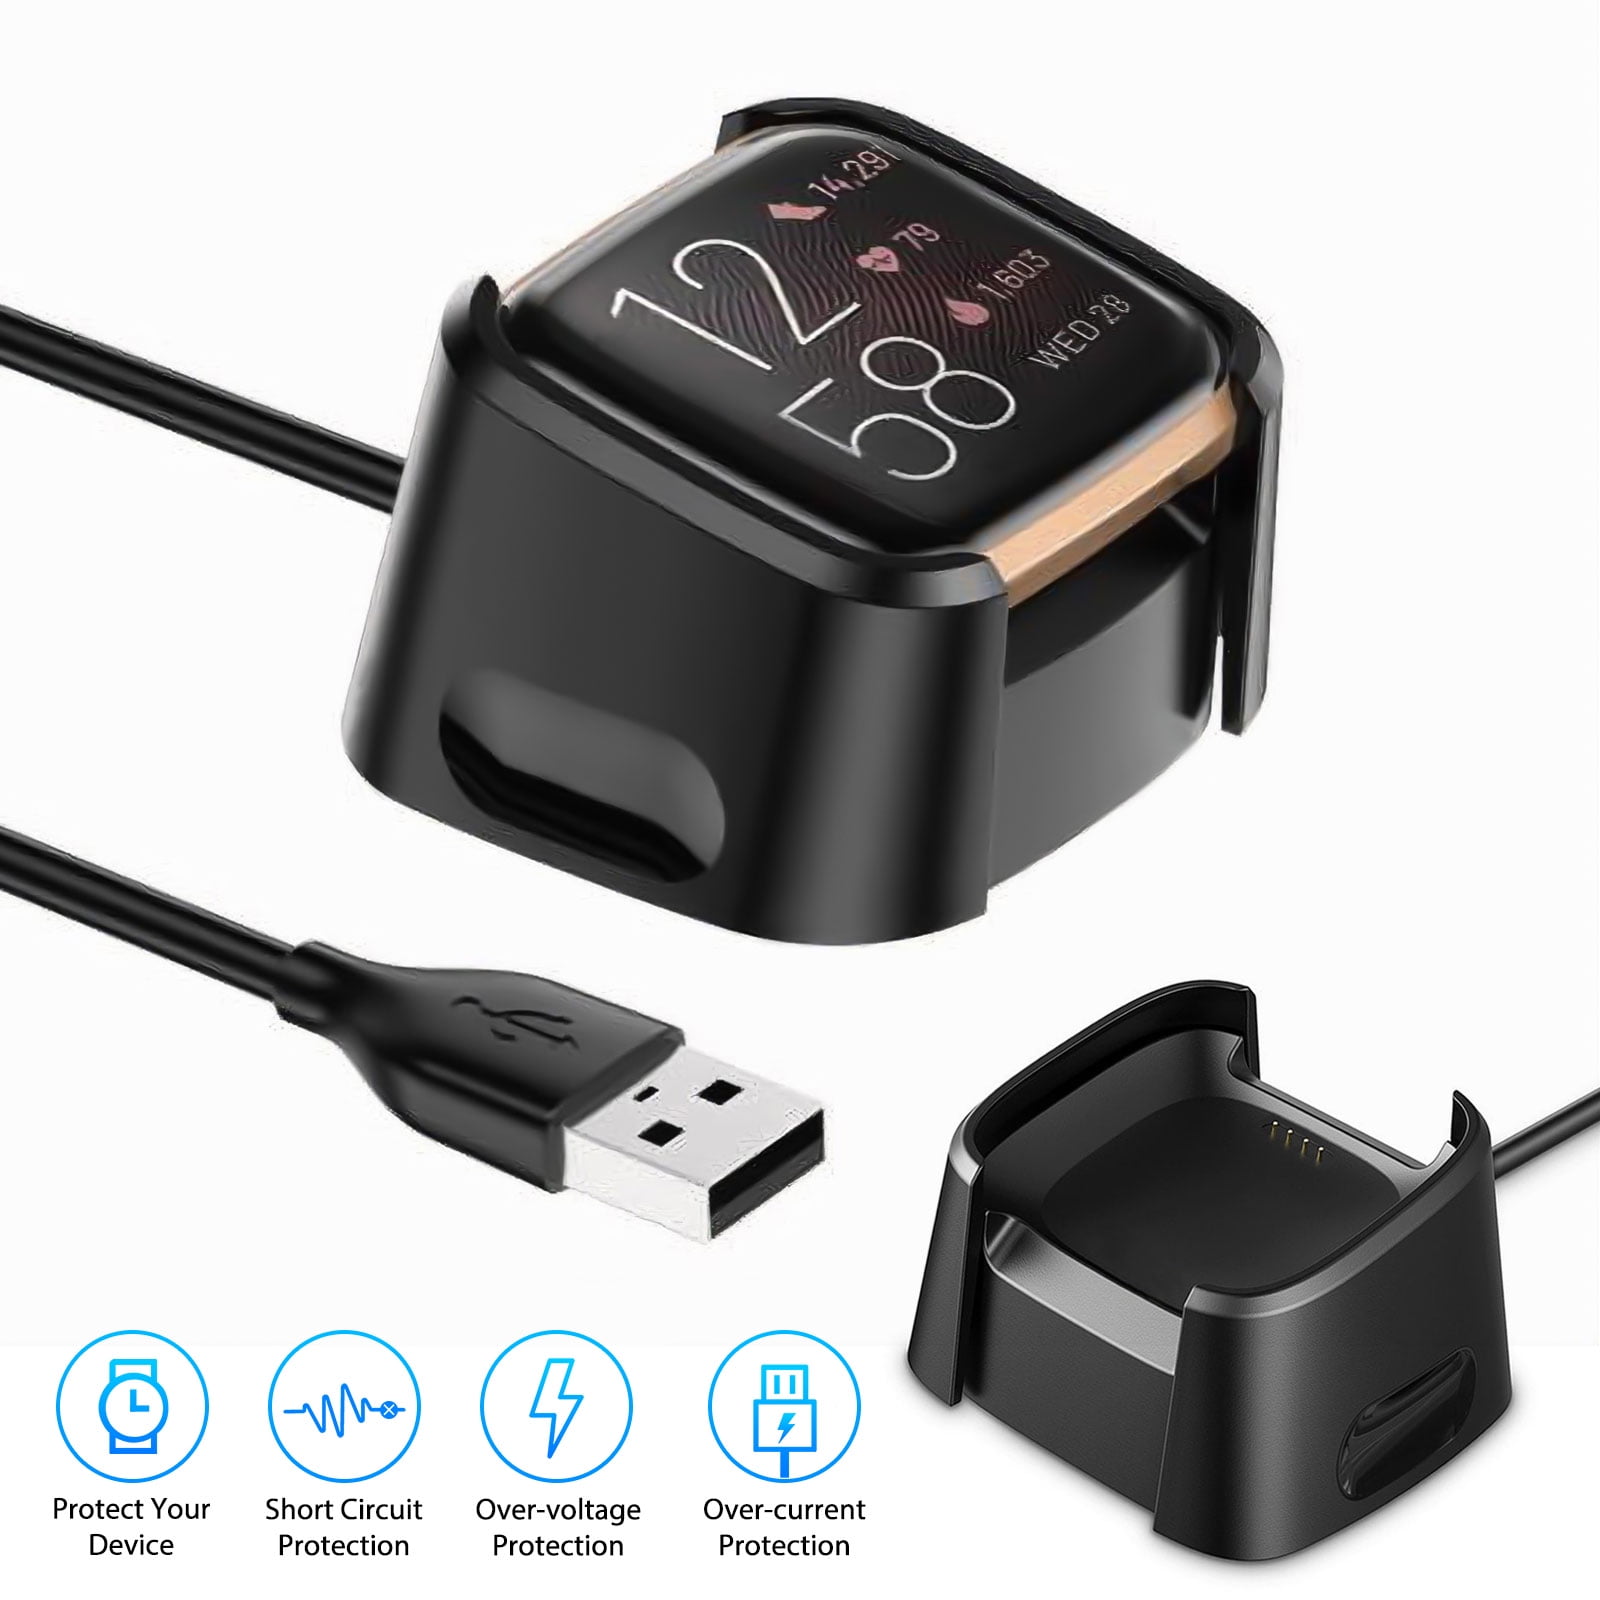 versa 2 chargers